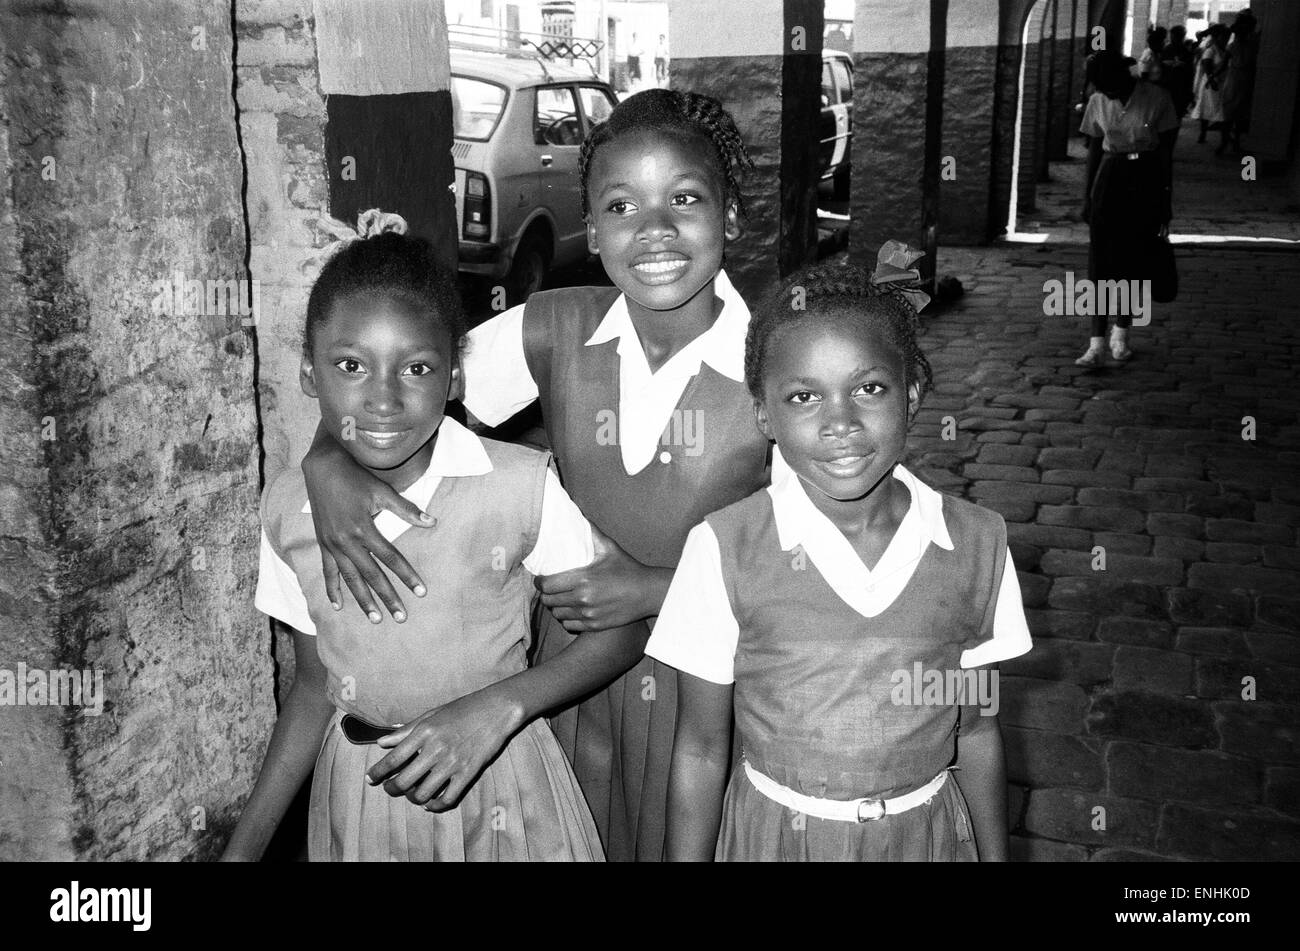 Children on their way to school in Kingston, Jamaica, January 1984. Stock Photo